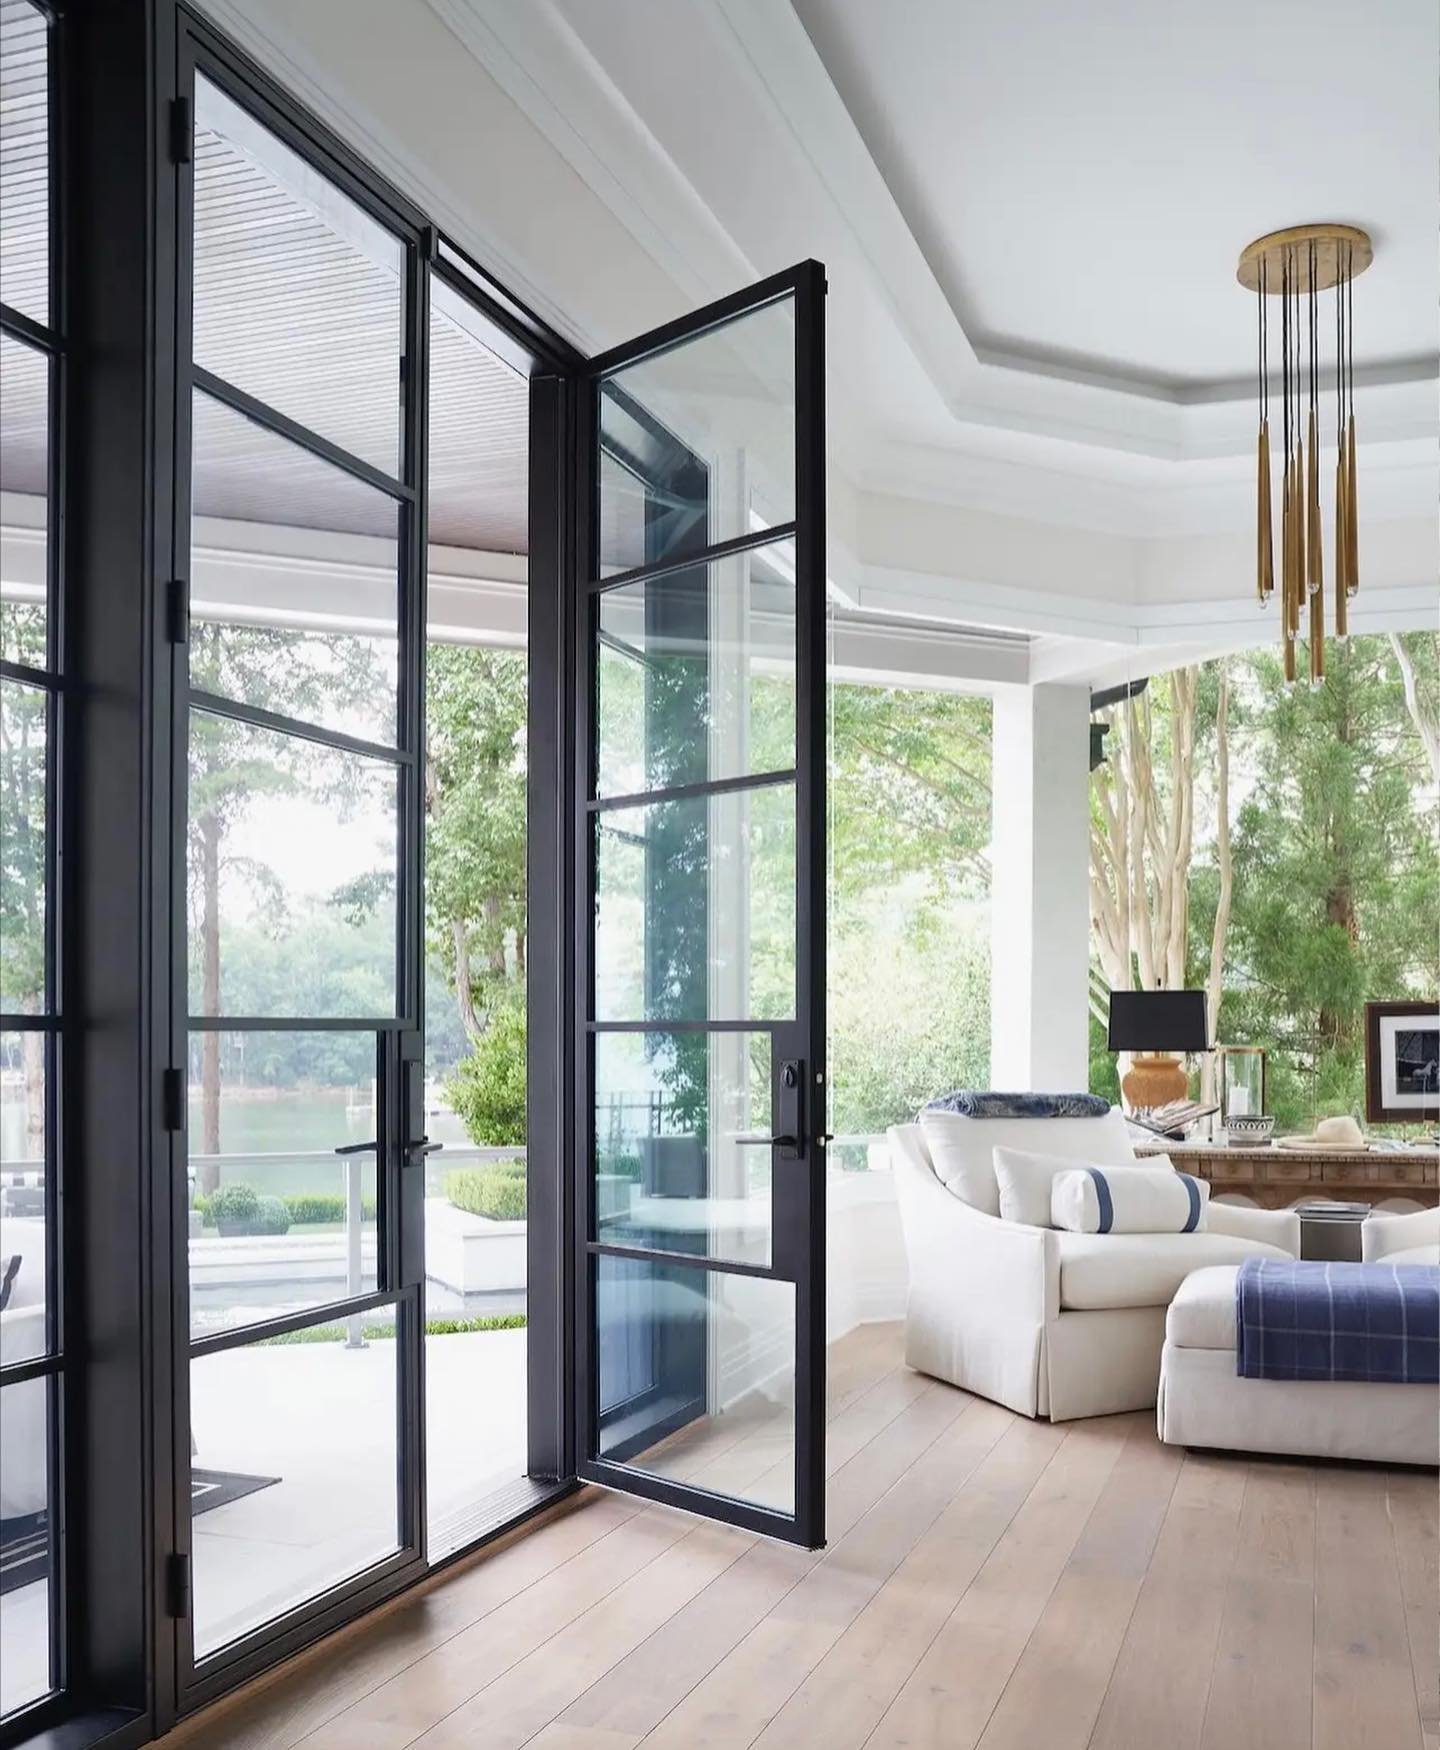 Imagine a door that doesn&rsquo;t just open to a room, but to a world of individuality. Our custom doors blend simplicity with uniqueness, creating an entrance that speaks volumes about your style. Crafted with precision and designed to stand out, ea